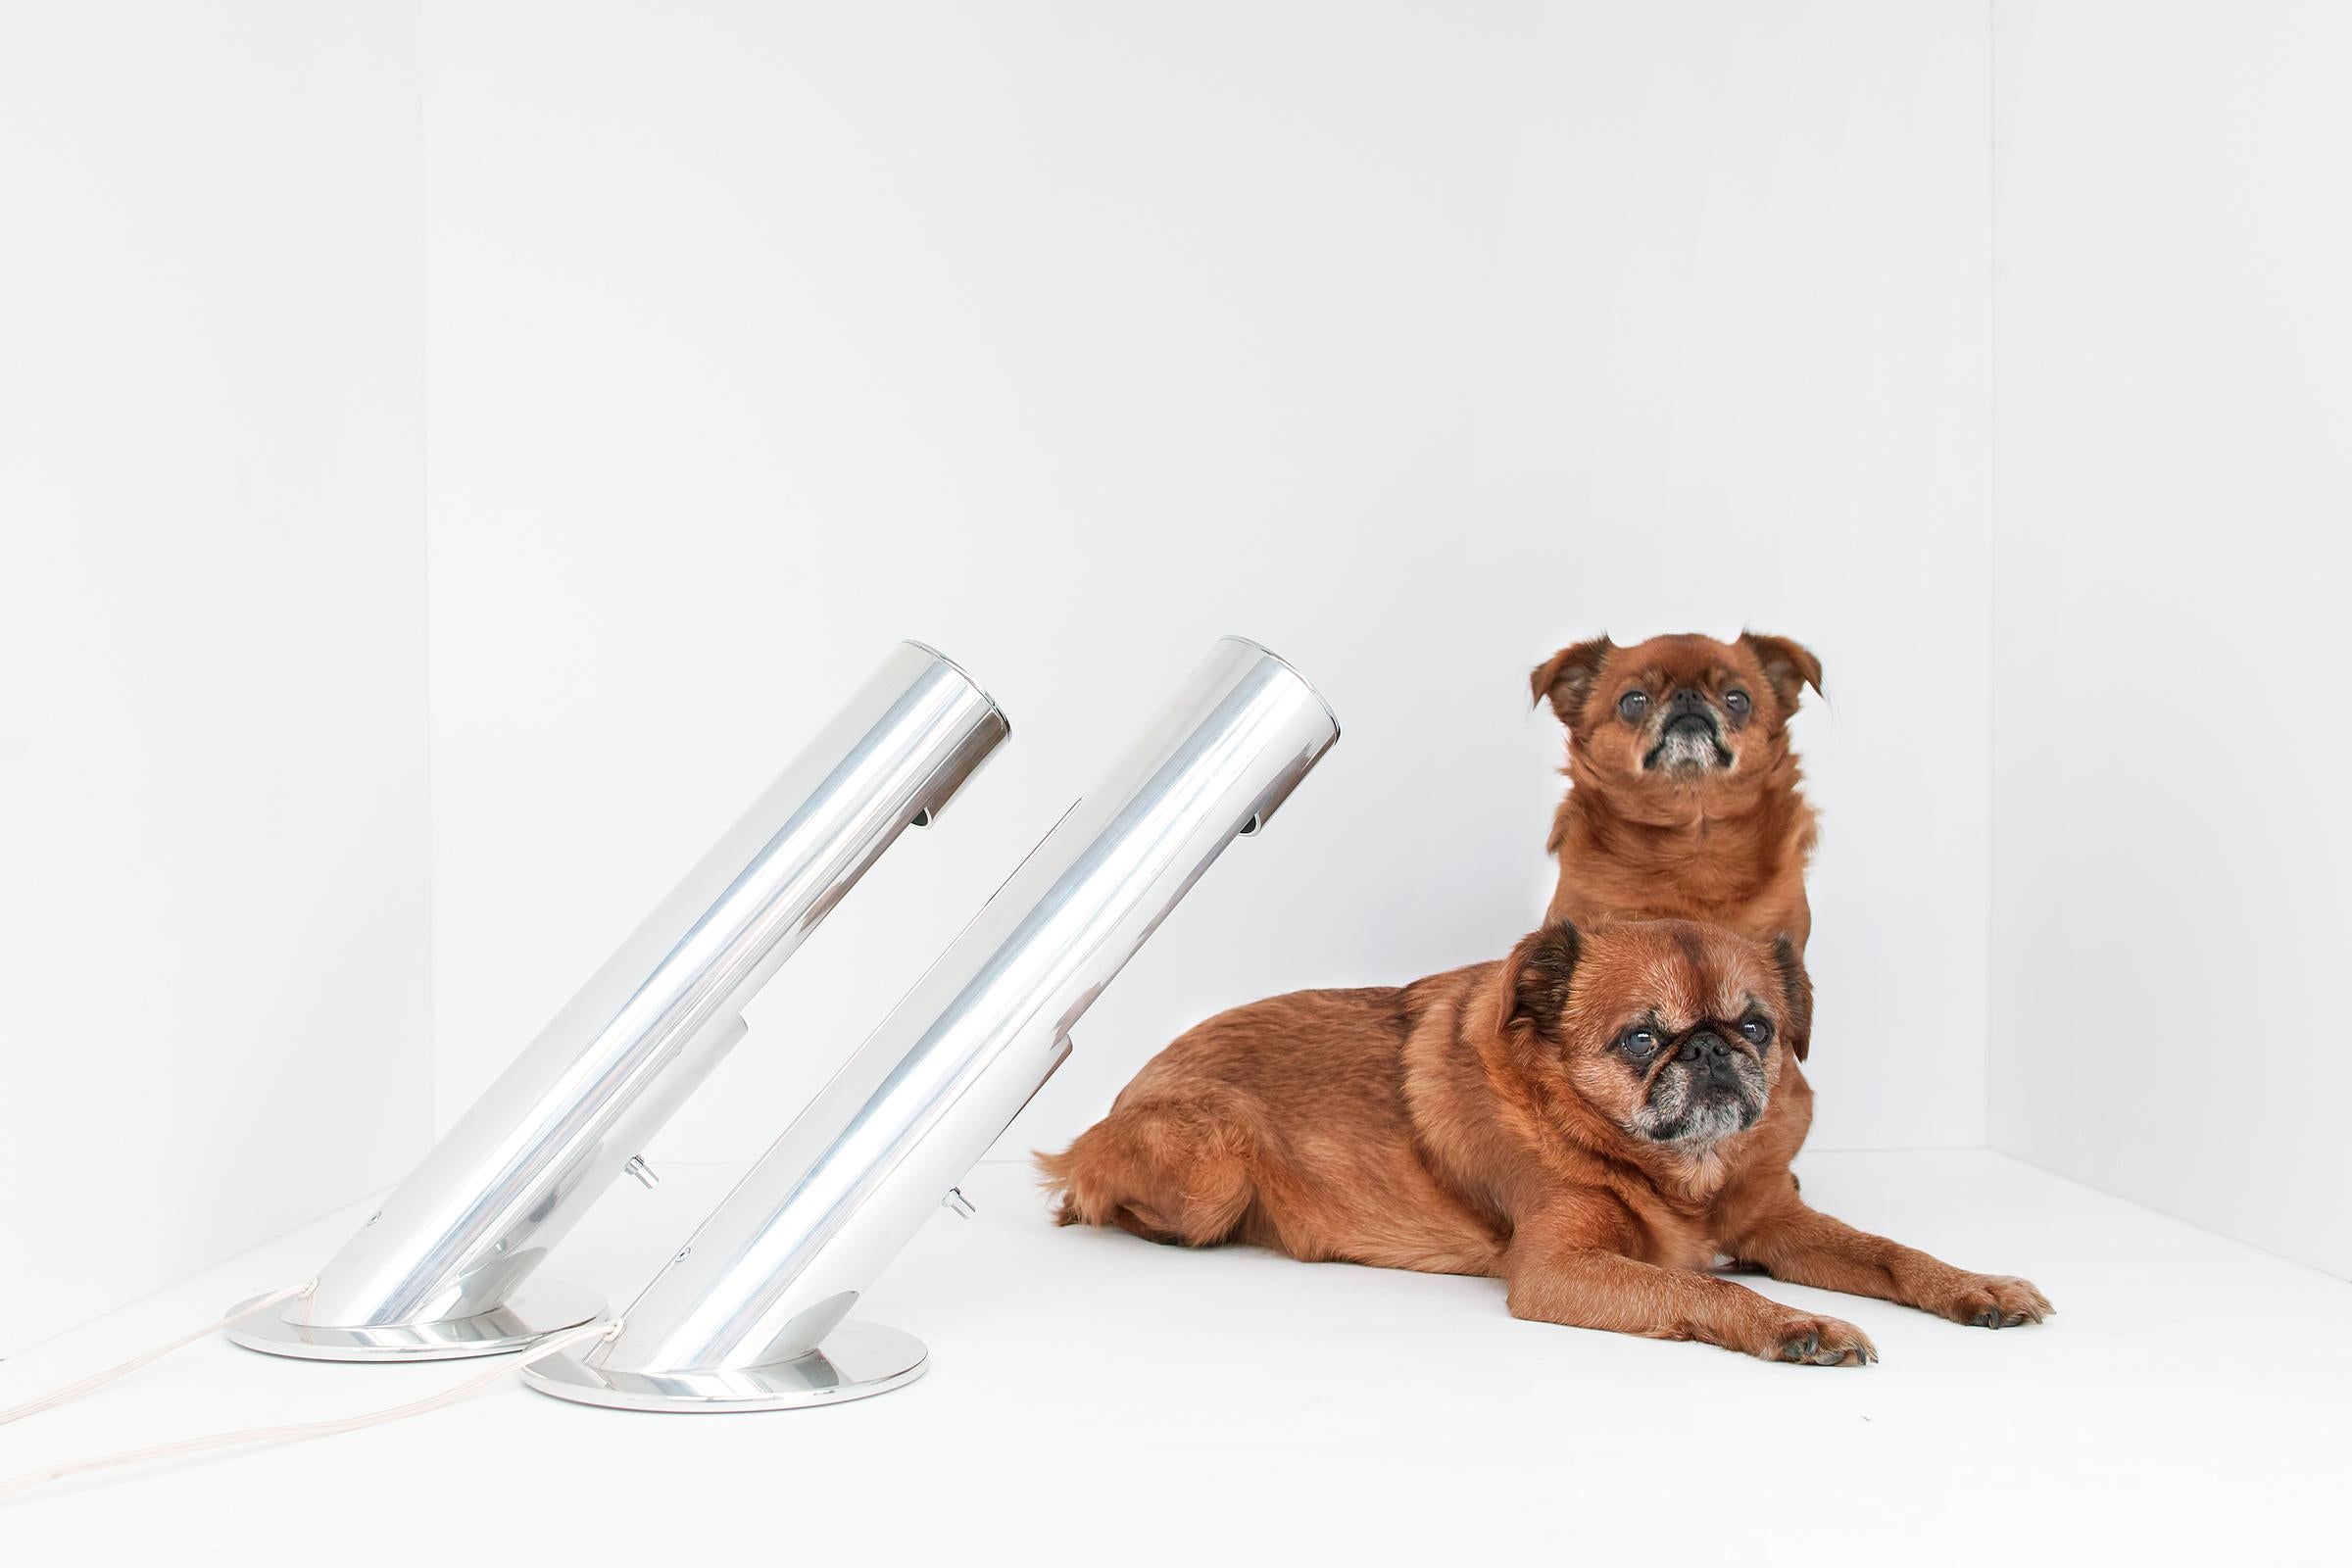 For your consideration is this pair of modern, angled, aluminum cylinder lamps by Paul Mayen for Habitat which feature clean modern forms, original porcelain sockets, original six-sided metal rotary switches, and mirror-like polished aluminum